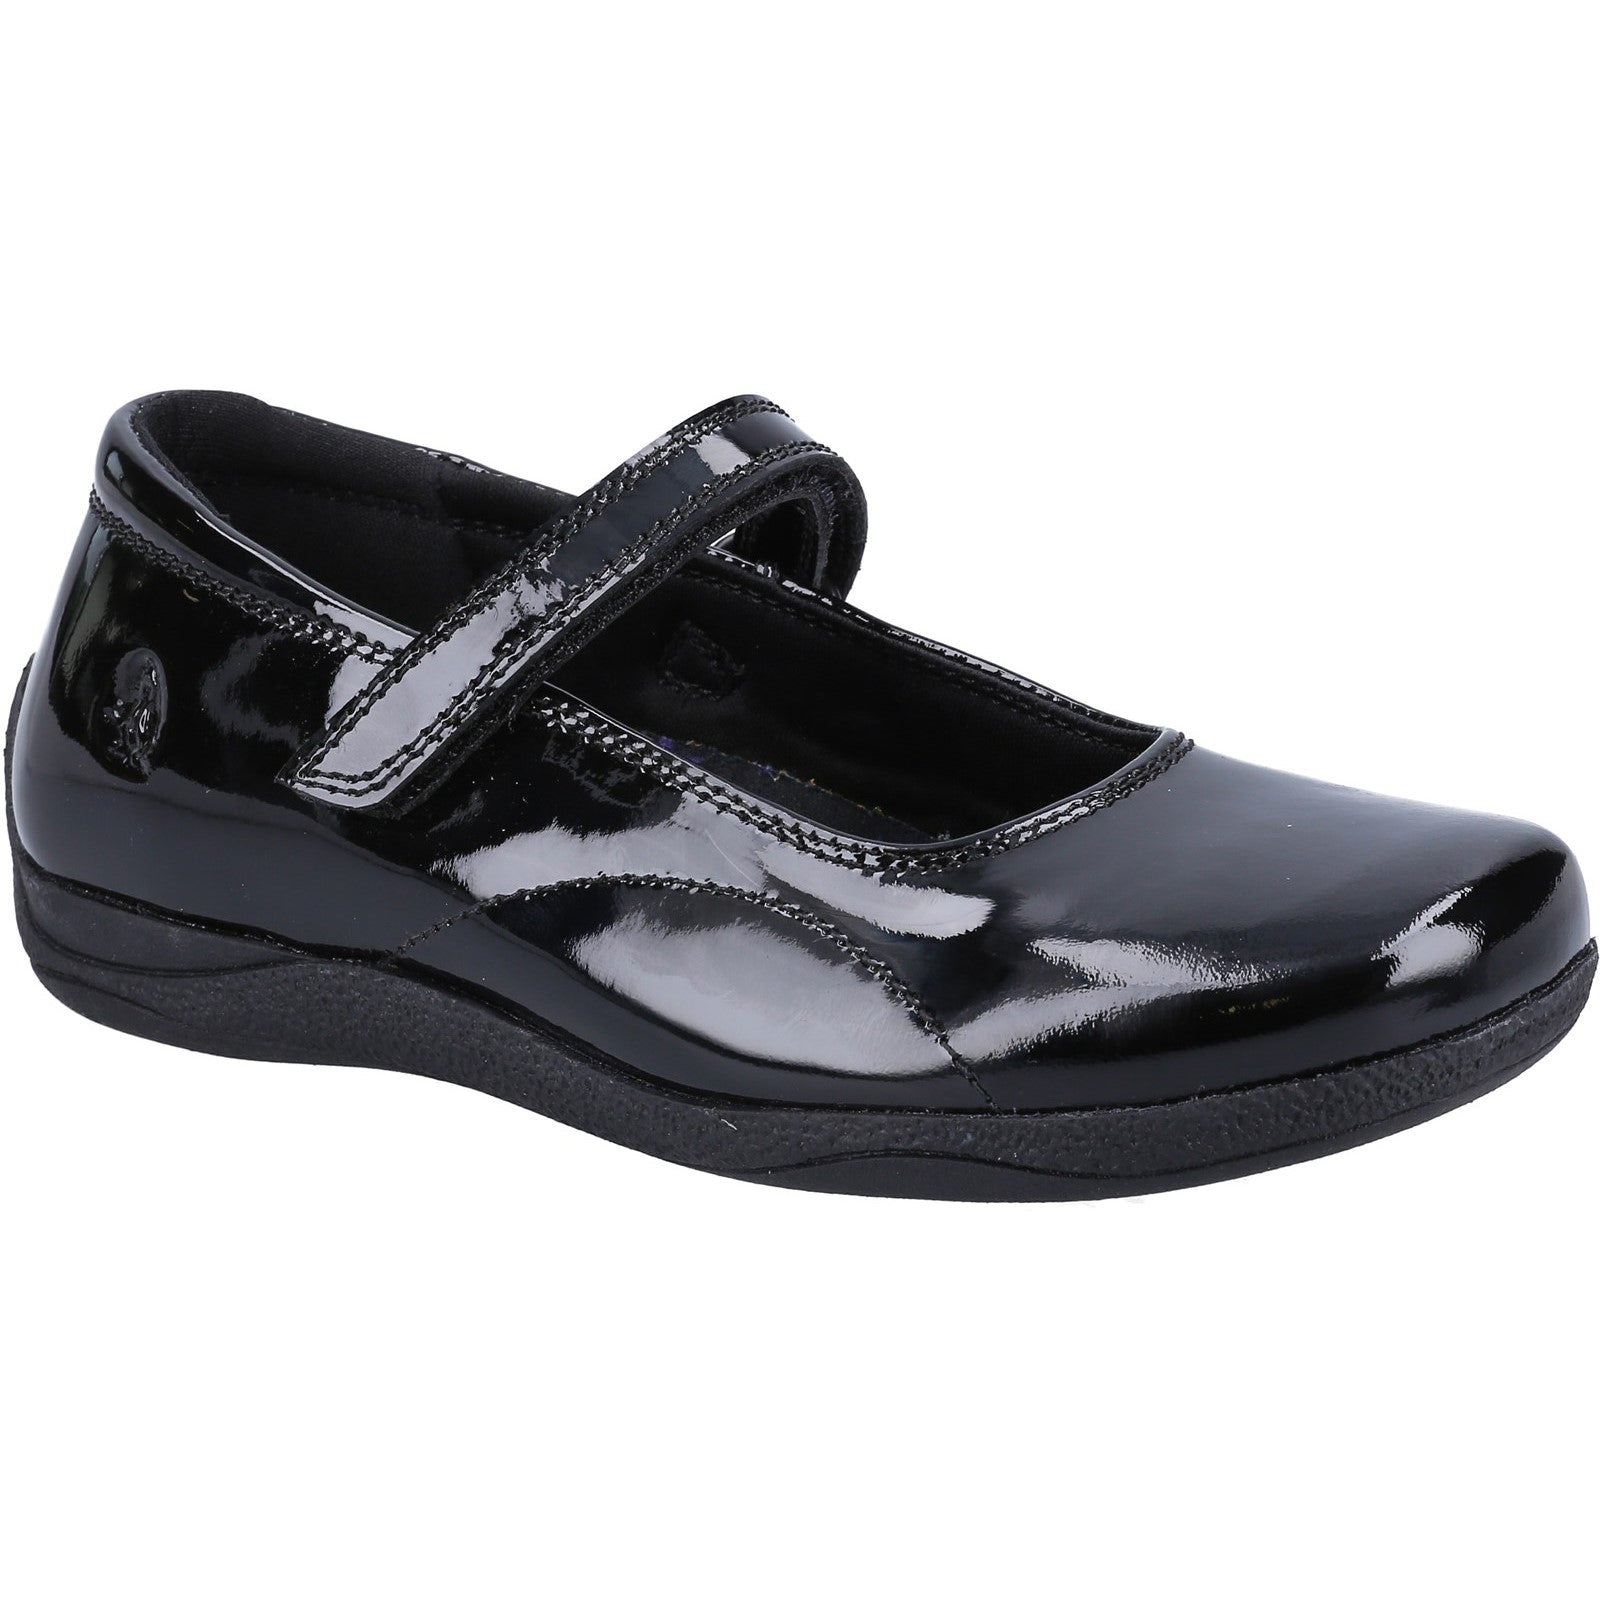 Hush Puppies Girls Aria Patent Leather School Shoes - Black